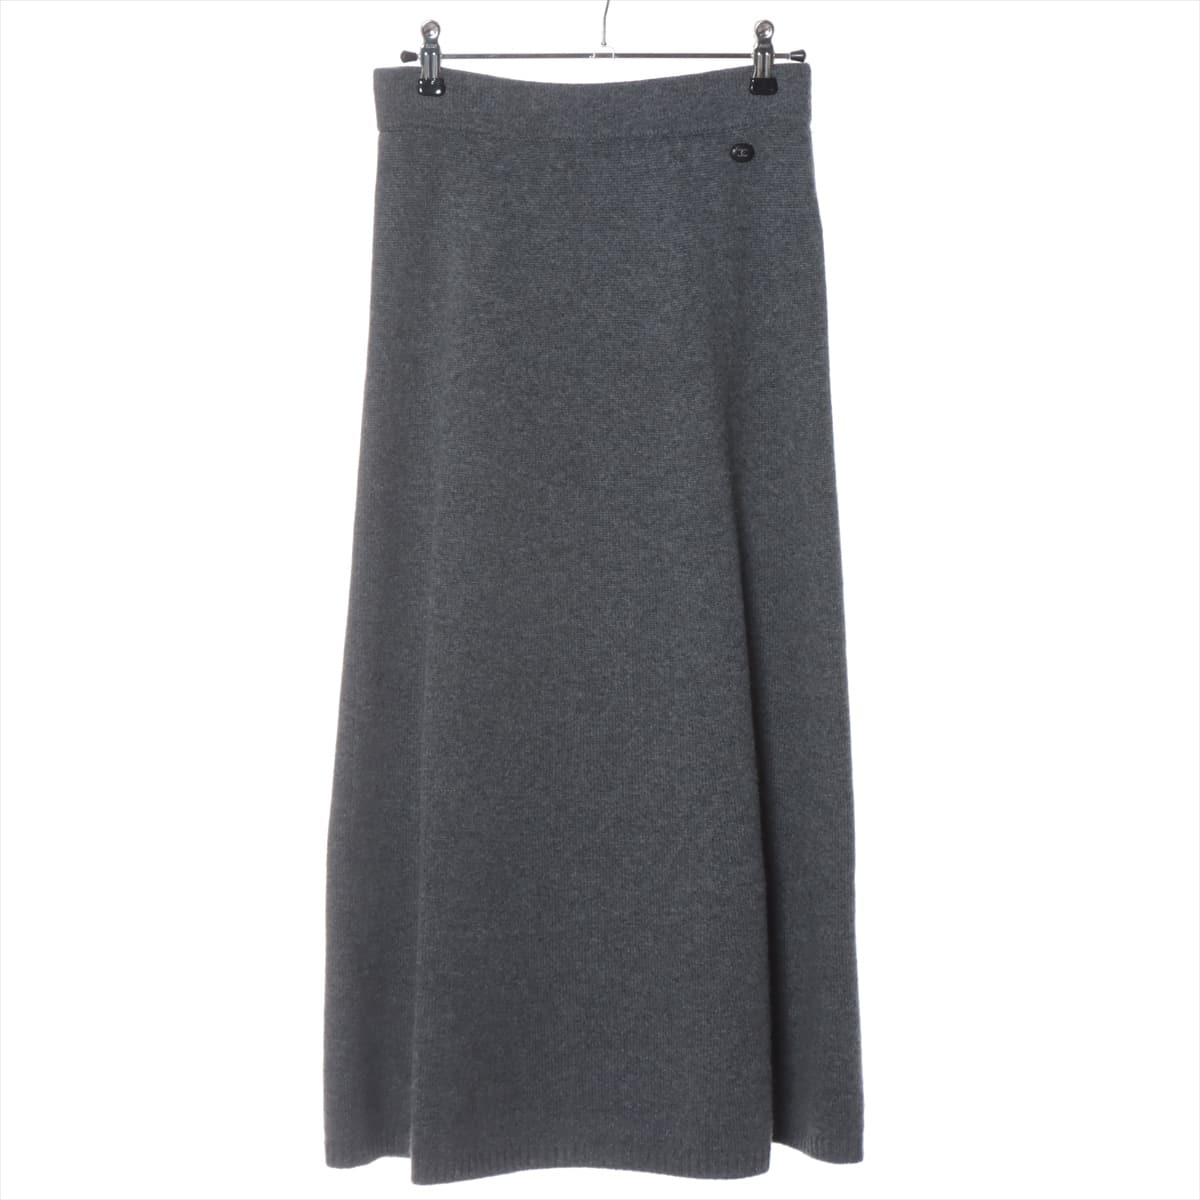 Chanel Coco Button P57 Cashmere Knit Skirt 36 Ladies' Grey